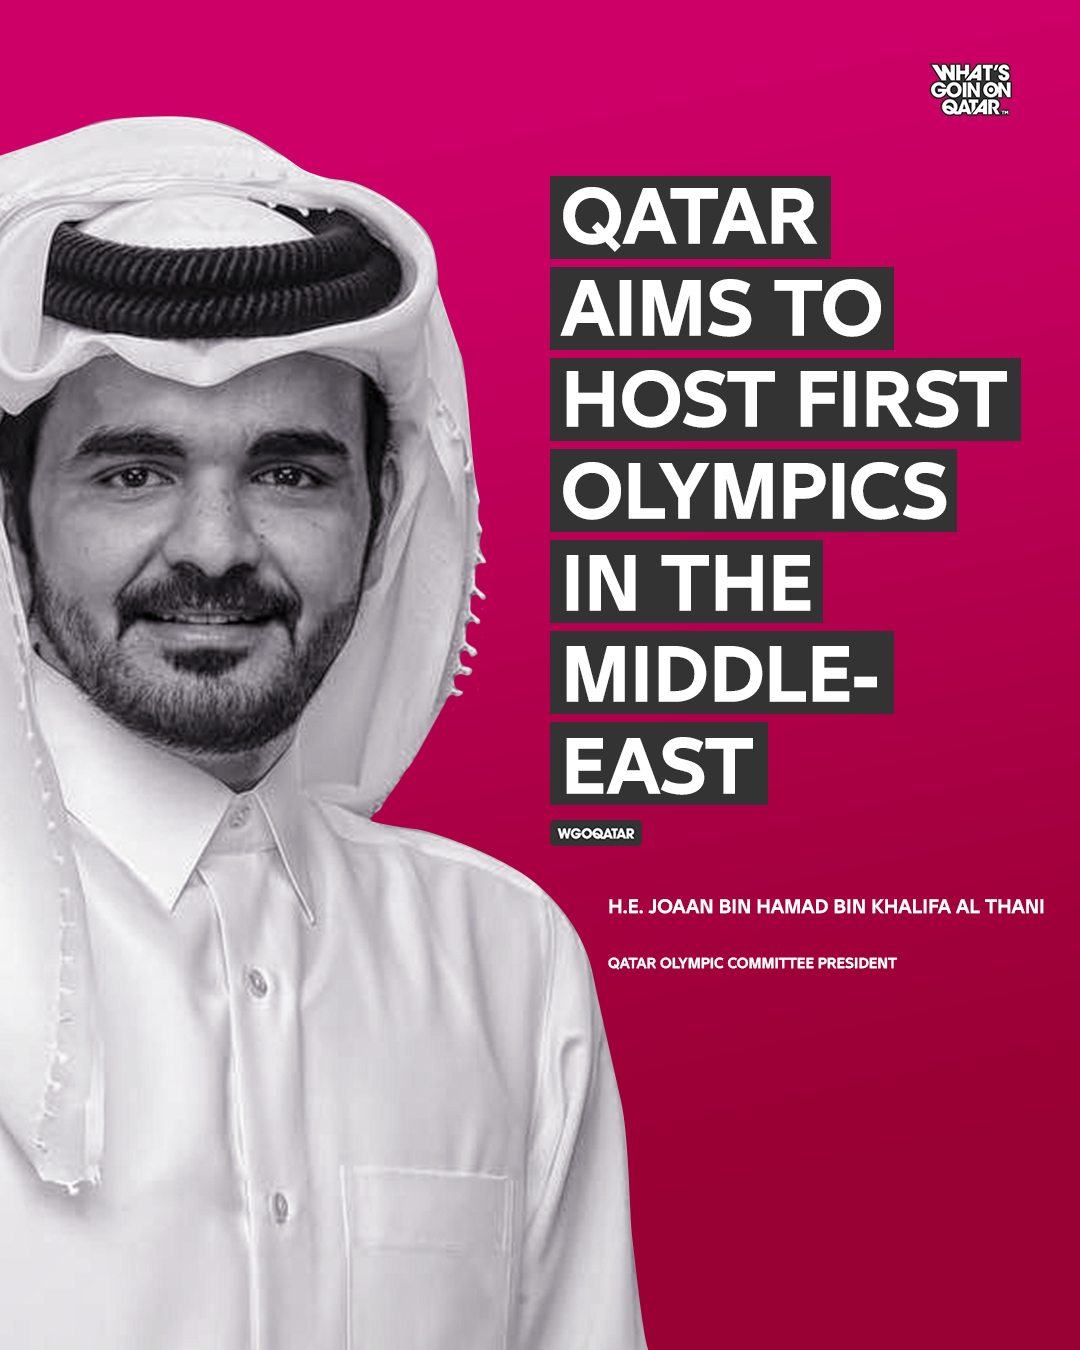 Sheikh Joaan: Qatar aims to host First Olympics in the Middle East